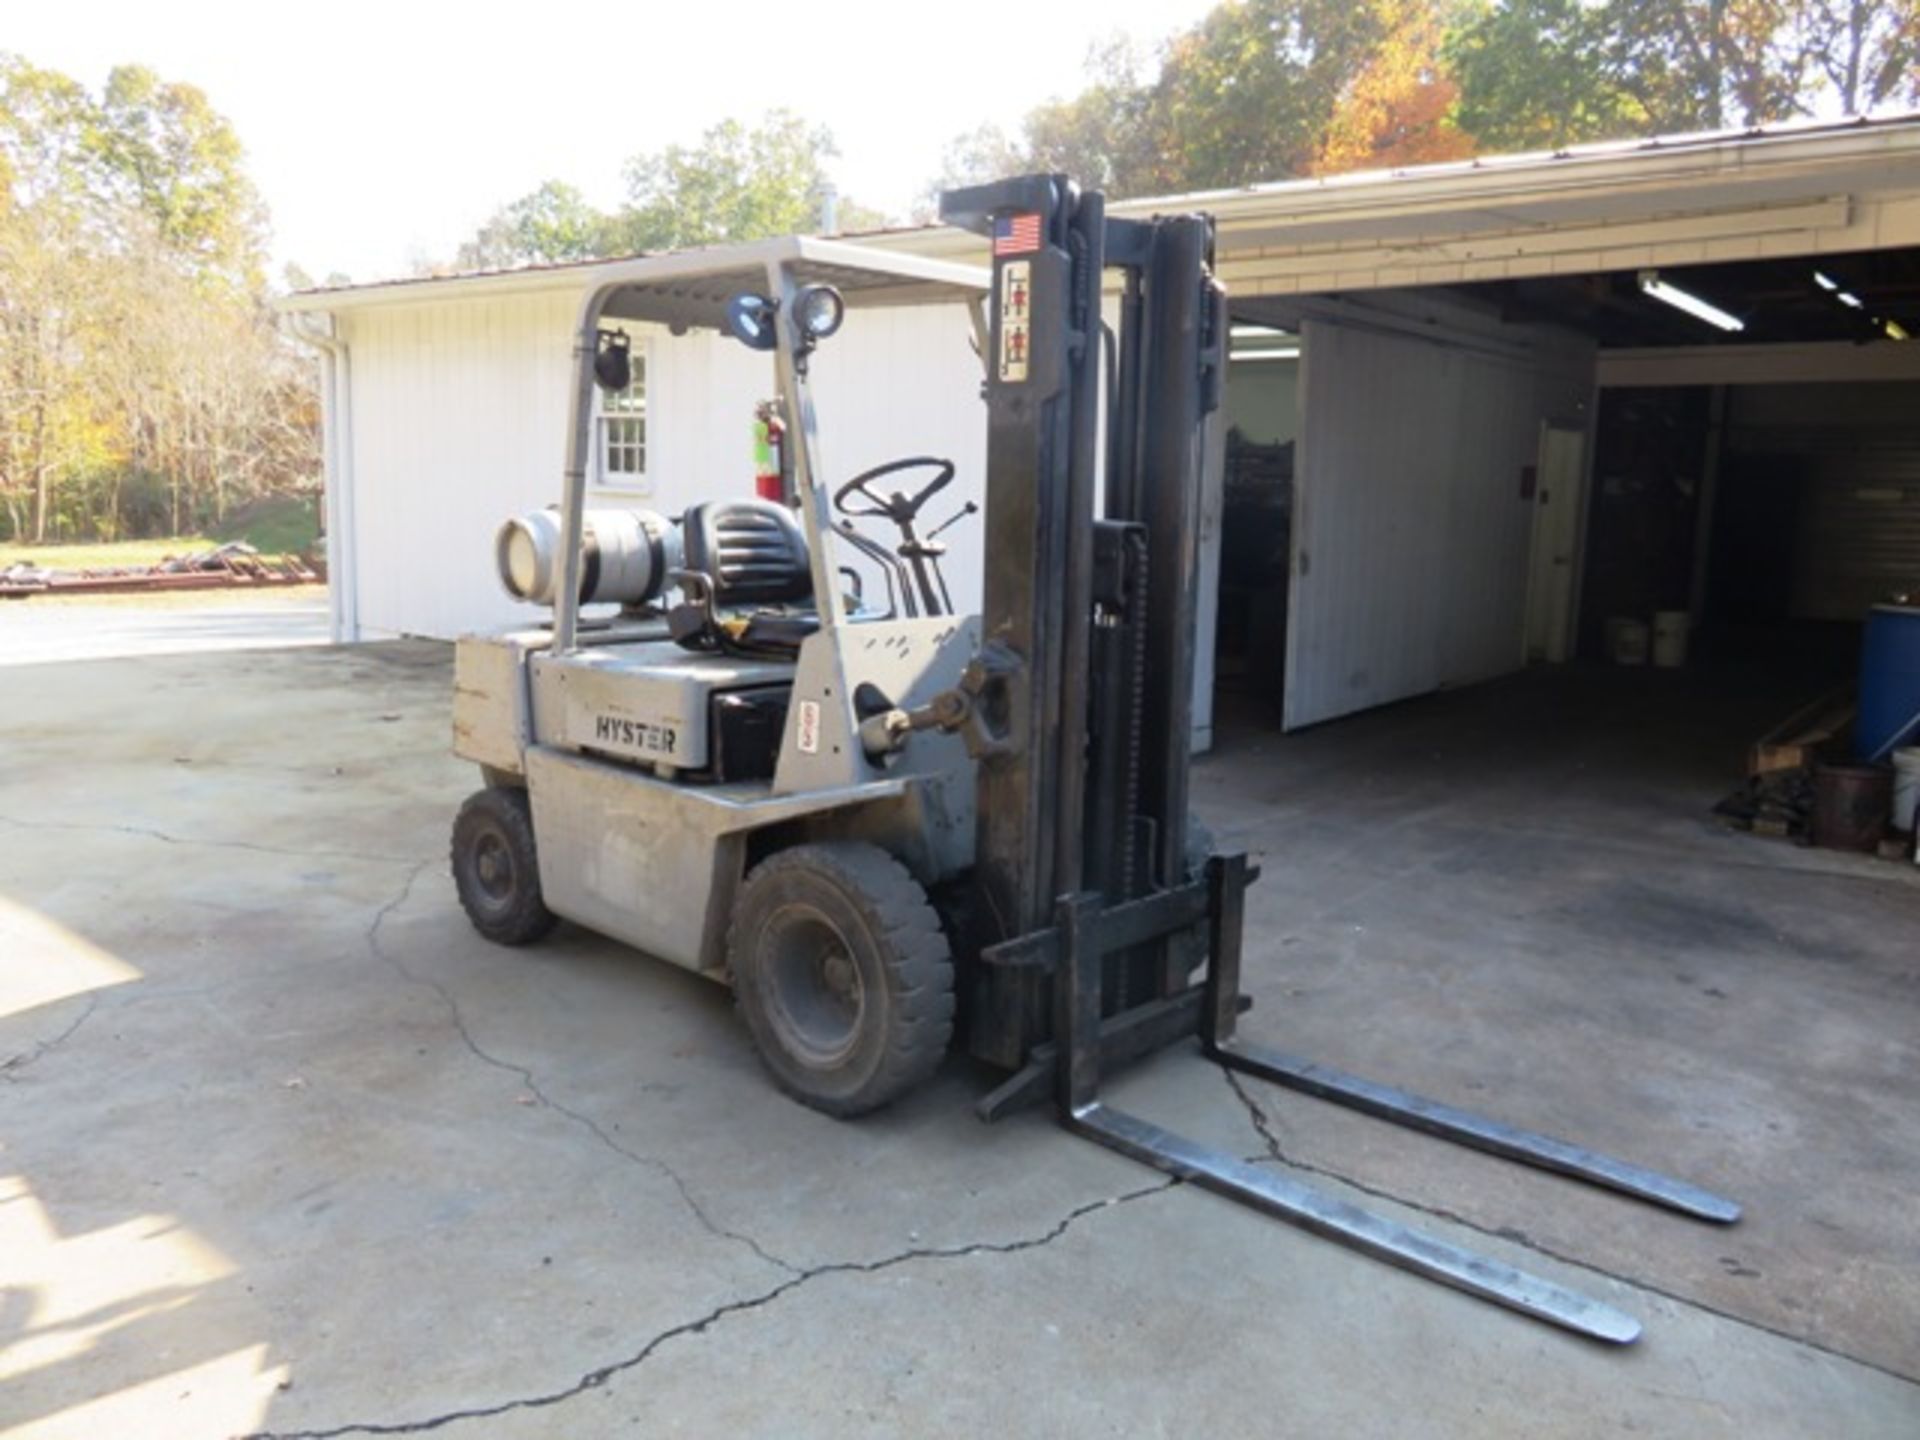 Hyster 5,400lb Capacity LP Forklift with 2-Stage Mast, Pneumatic Tires, Cage, sn:A177B20209H with - Image 3 of 3